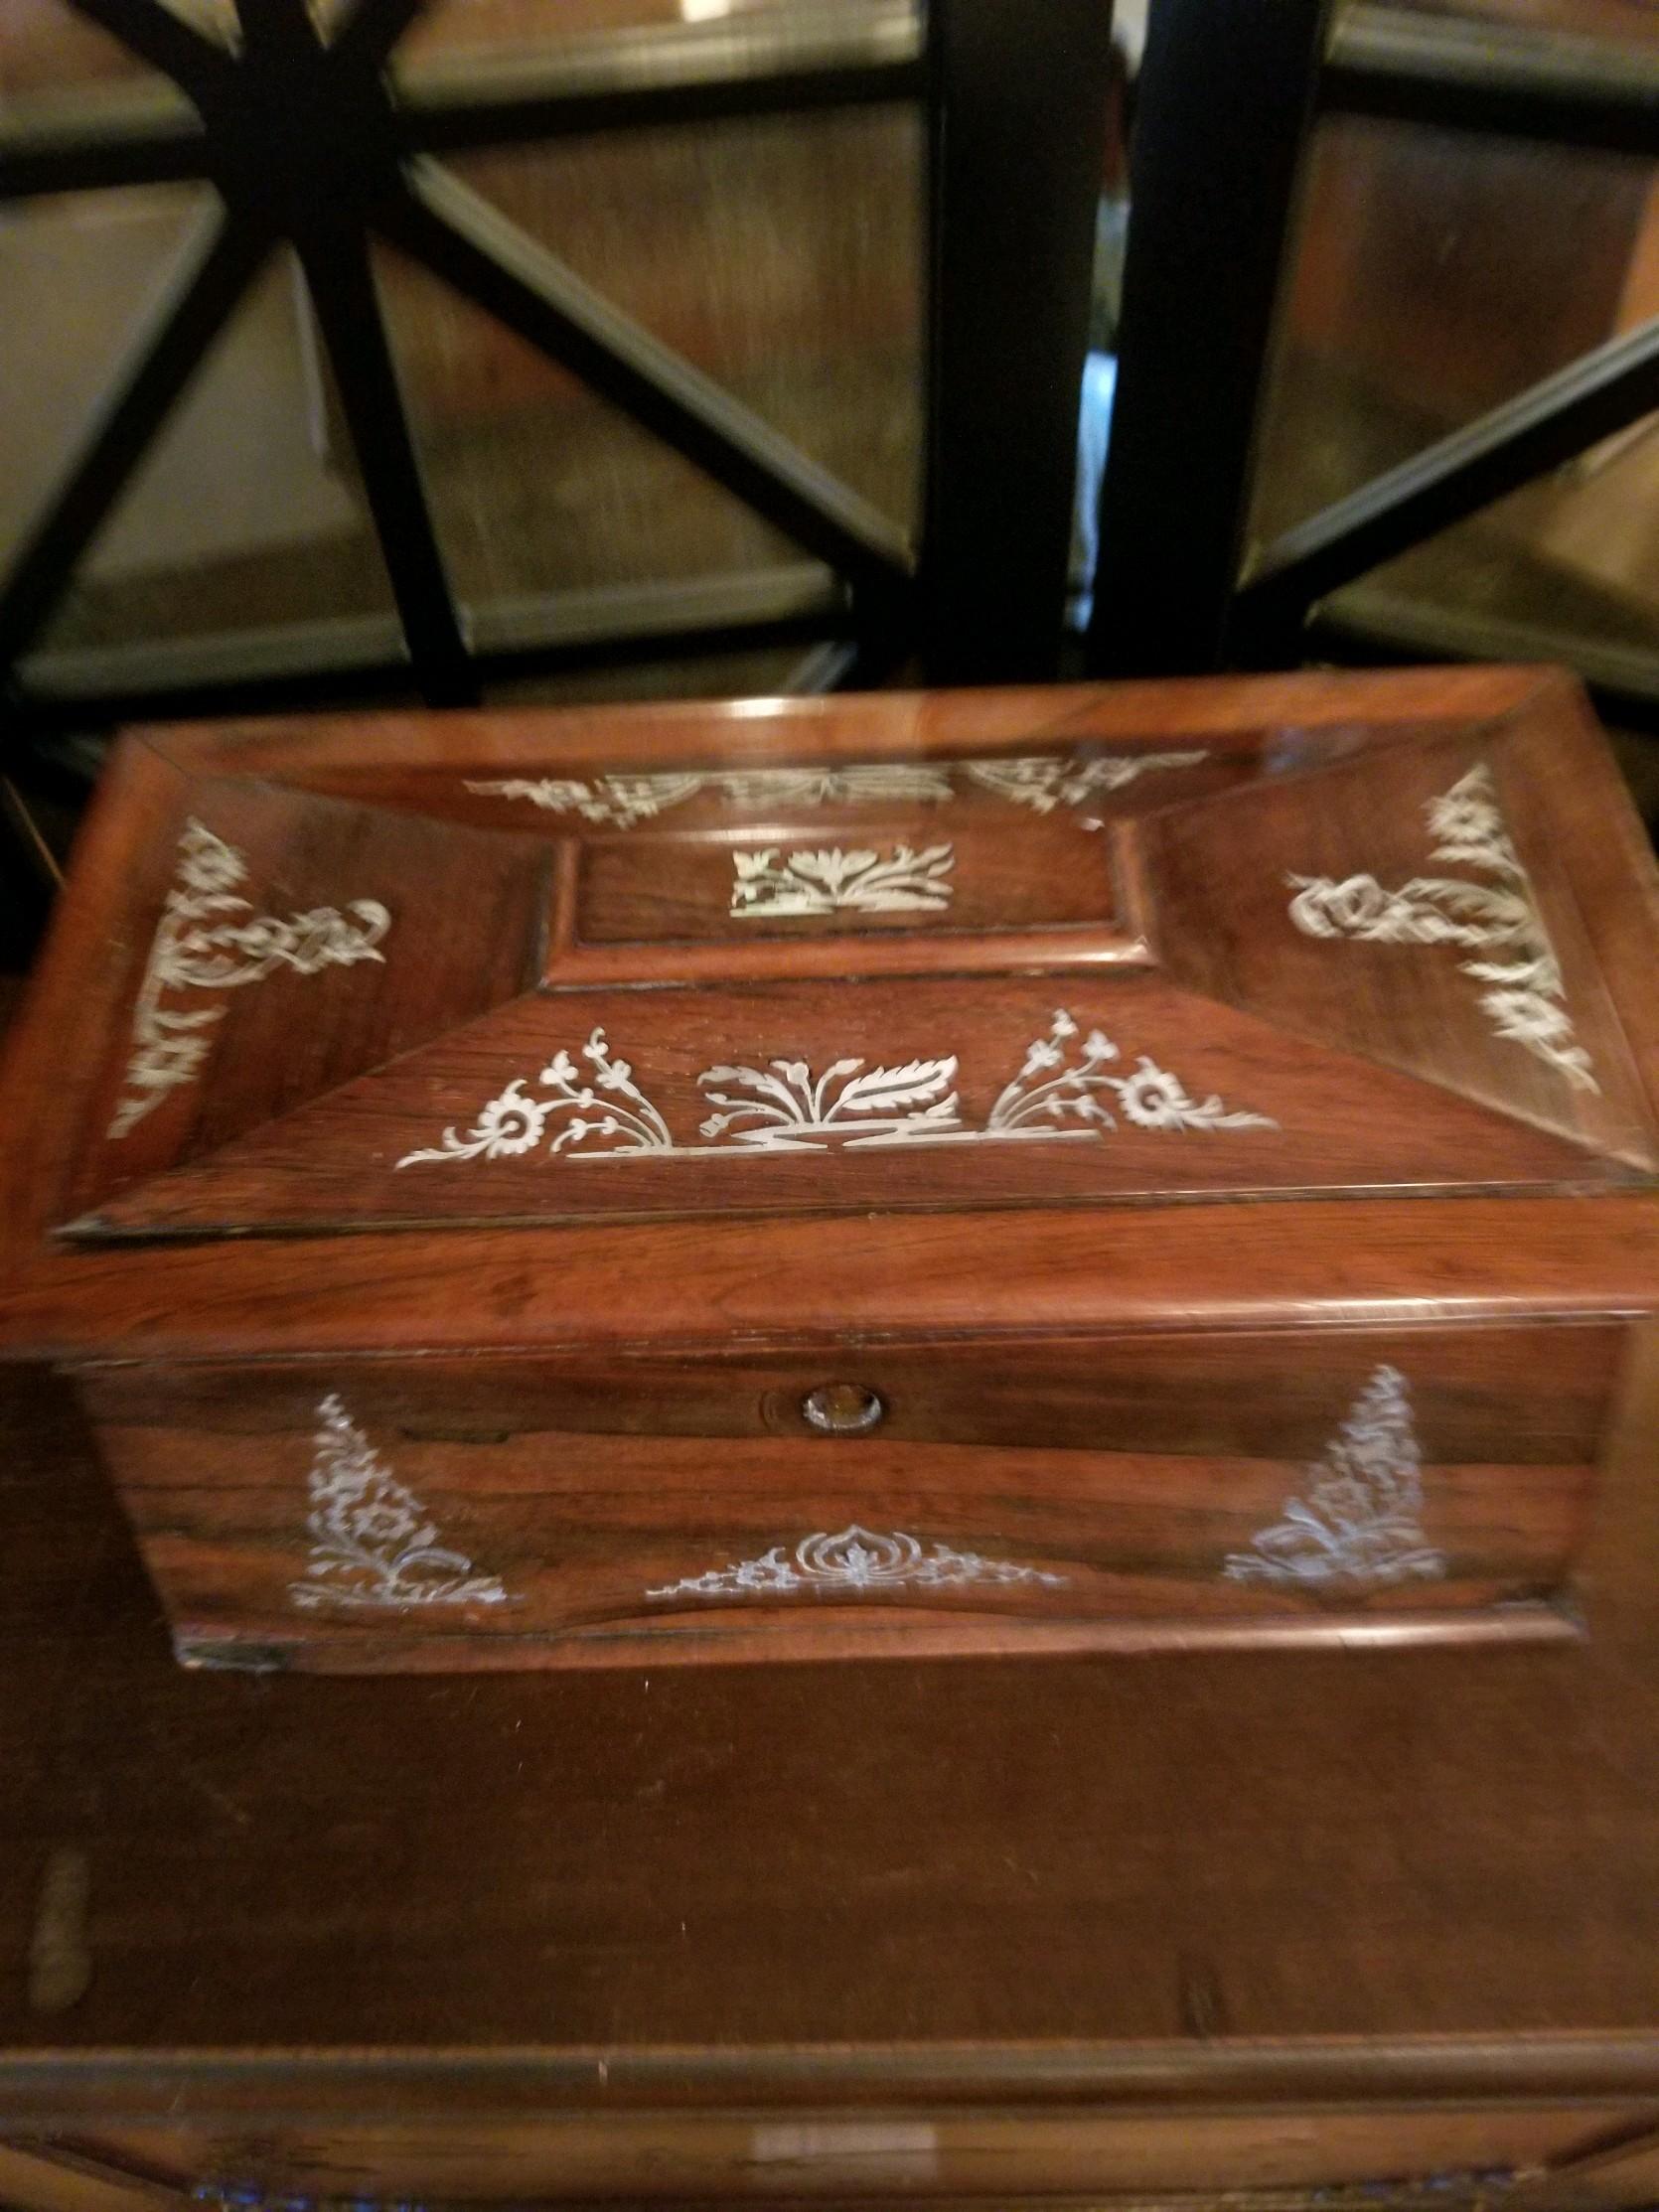 Beautifully executed, this mother of pearl inlay tea caddy does it all. In good condition, it has all of its parts: The individual containers and even a footed waste bowl. The details surround the box and is a wonderful presentation piece. In good